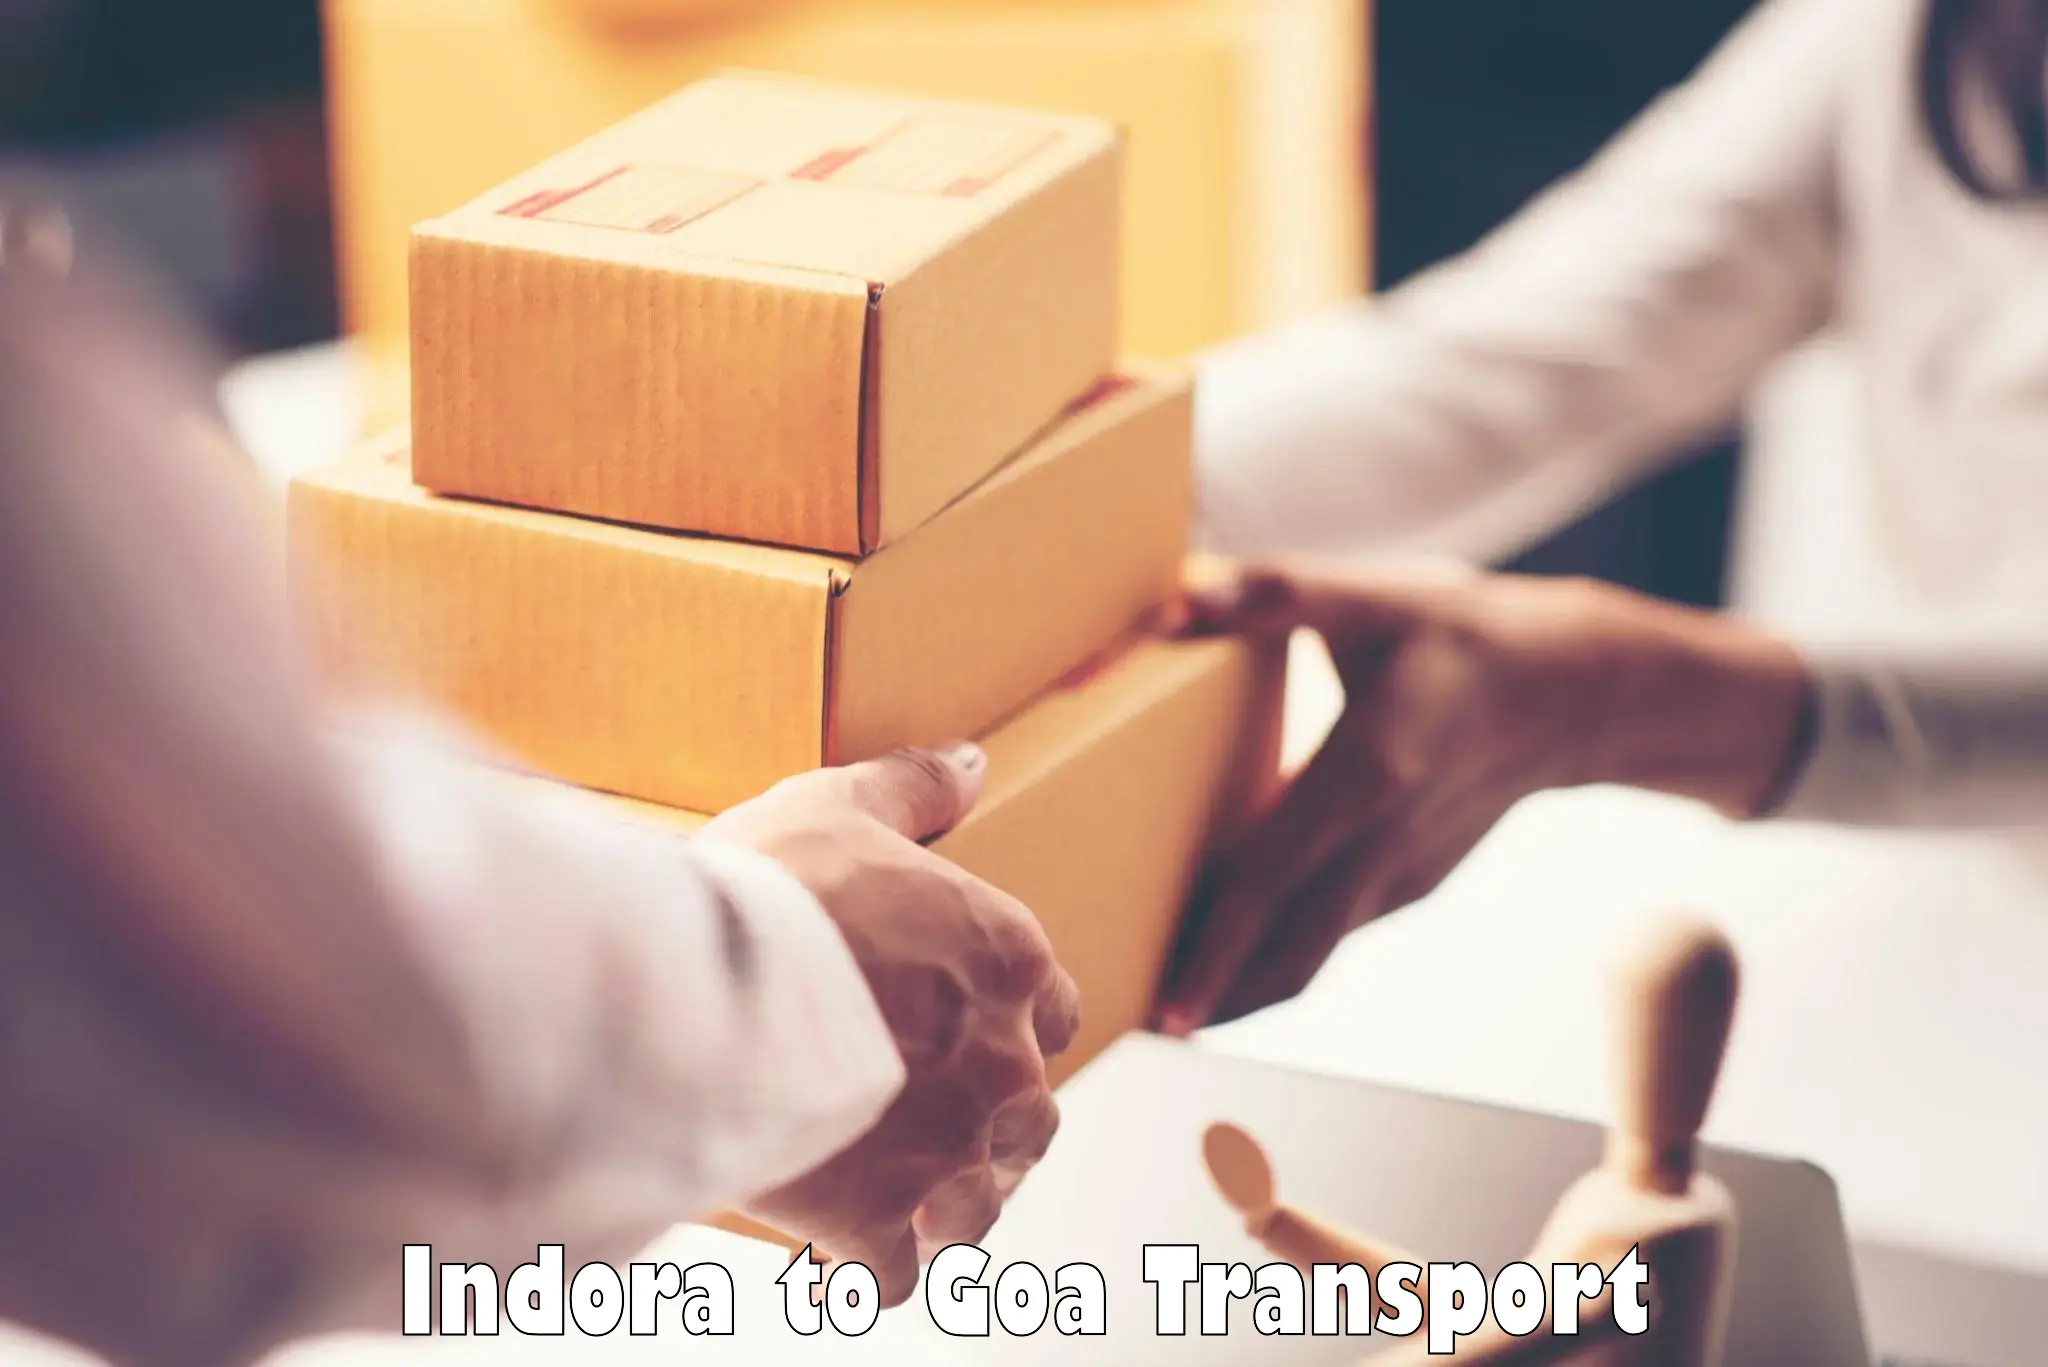 Transport bike from one state to another Indora to Goa